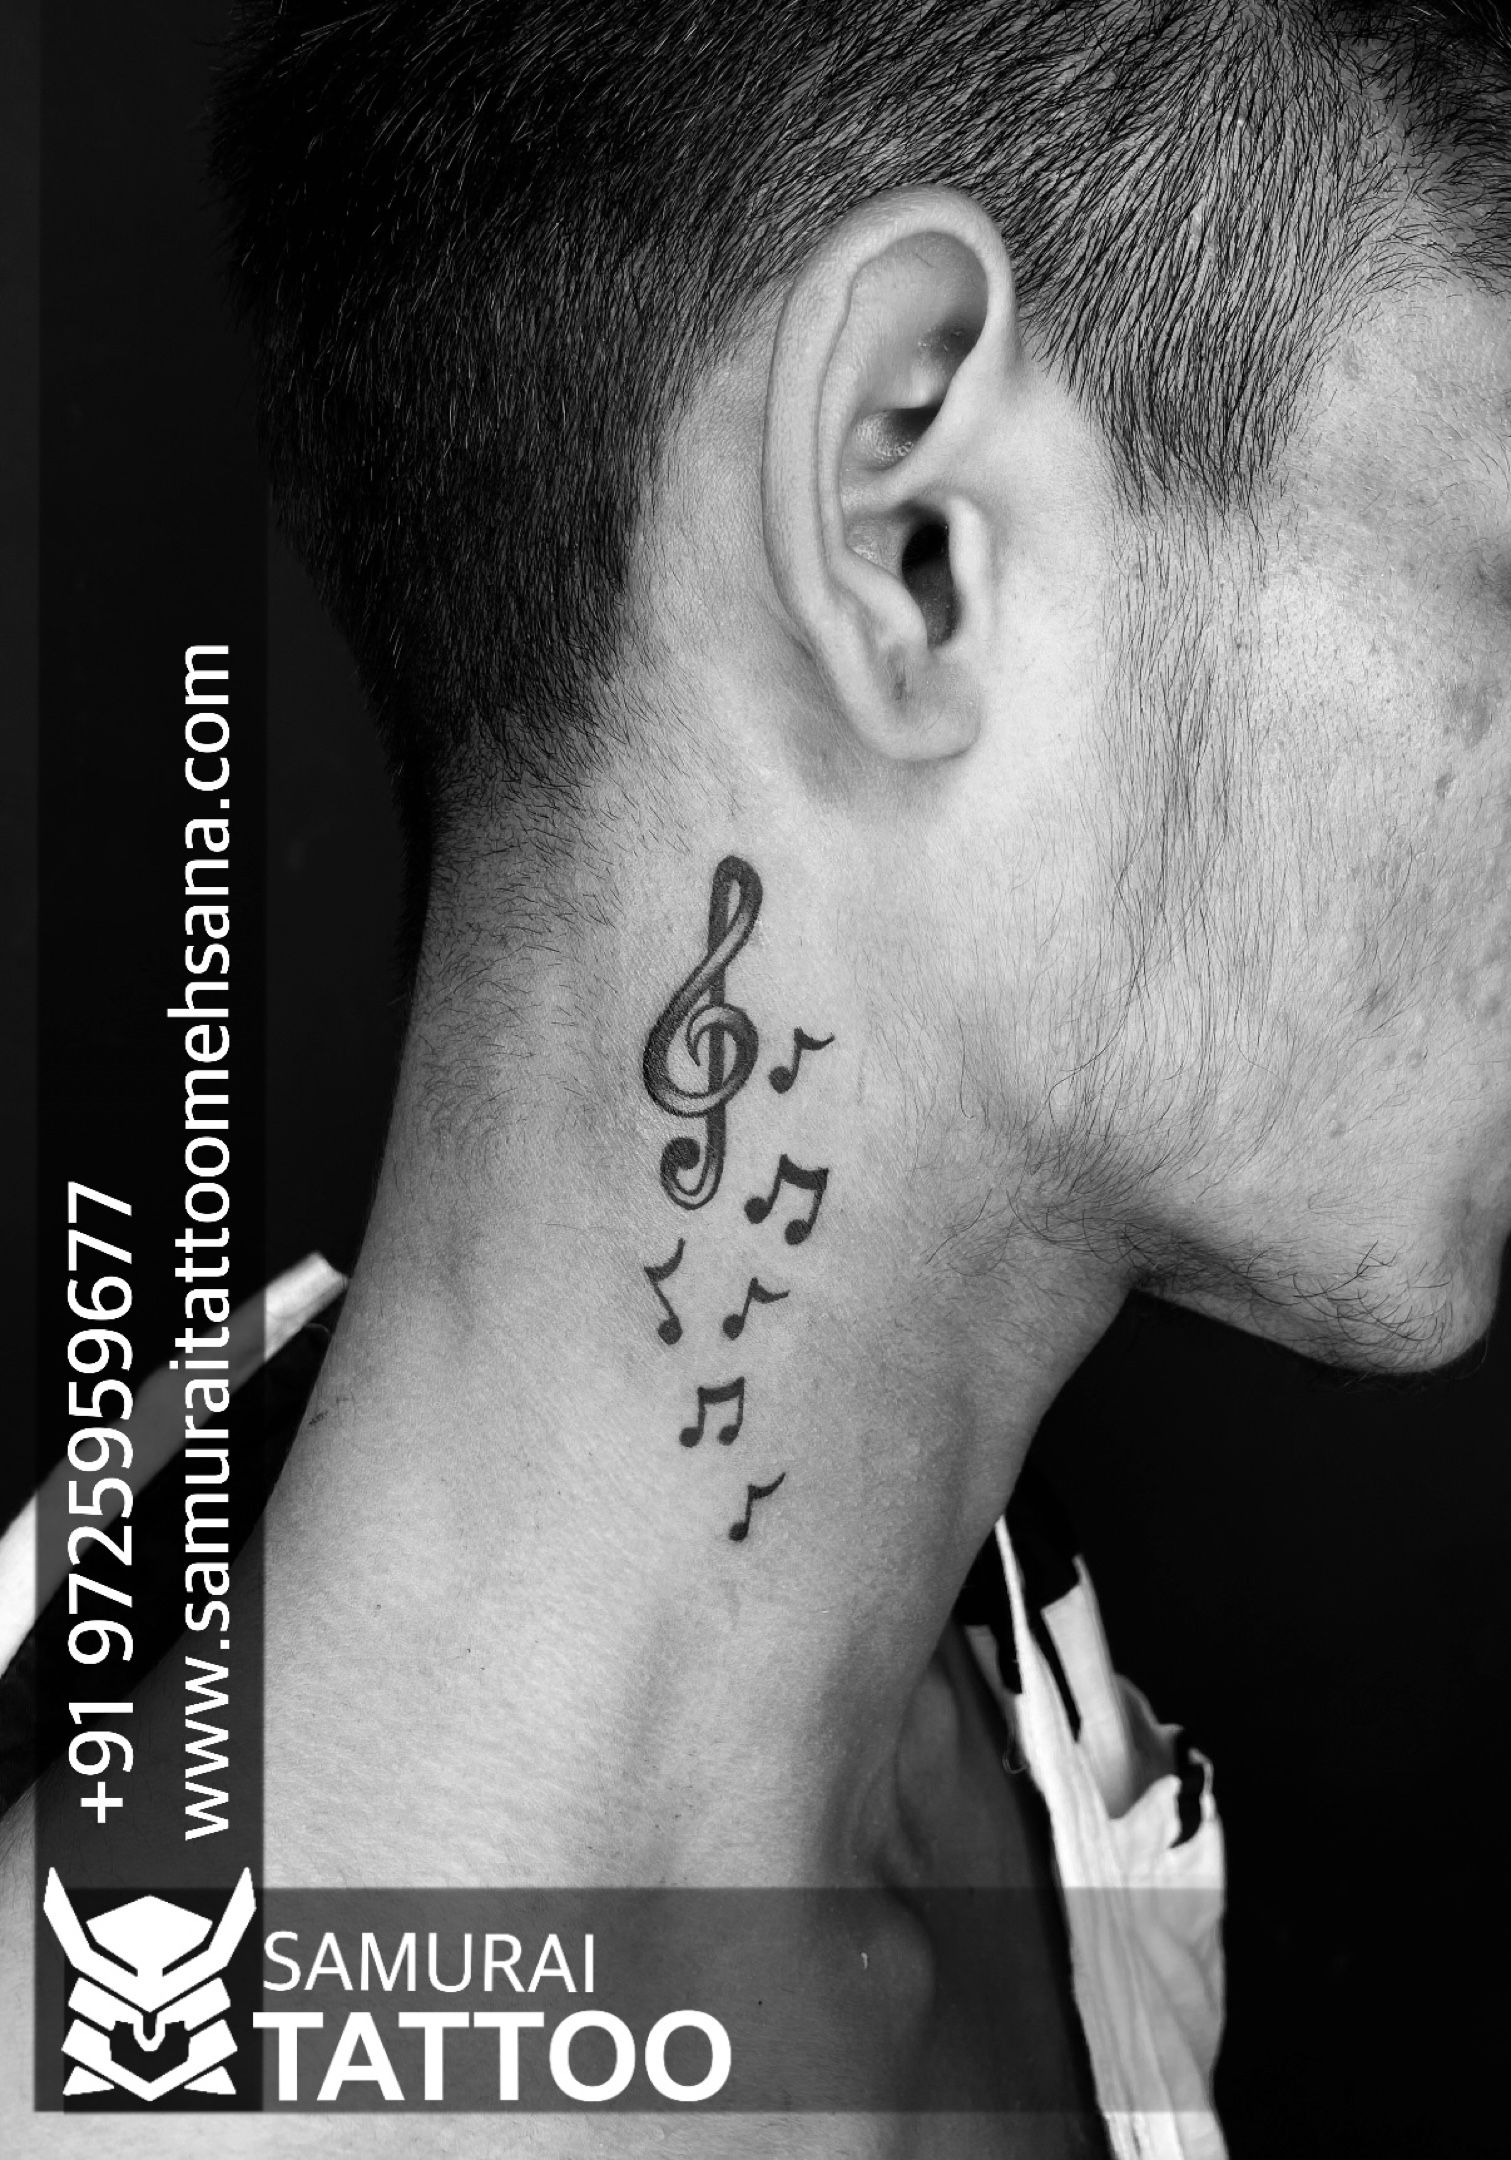 What Does A Musical Note Tattooed On Neck Mean